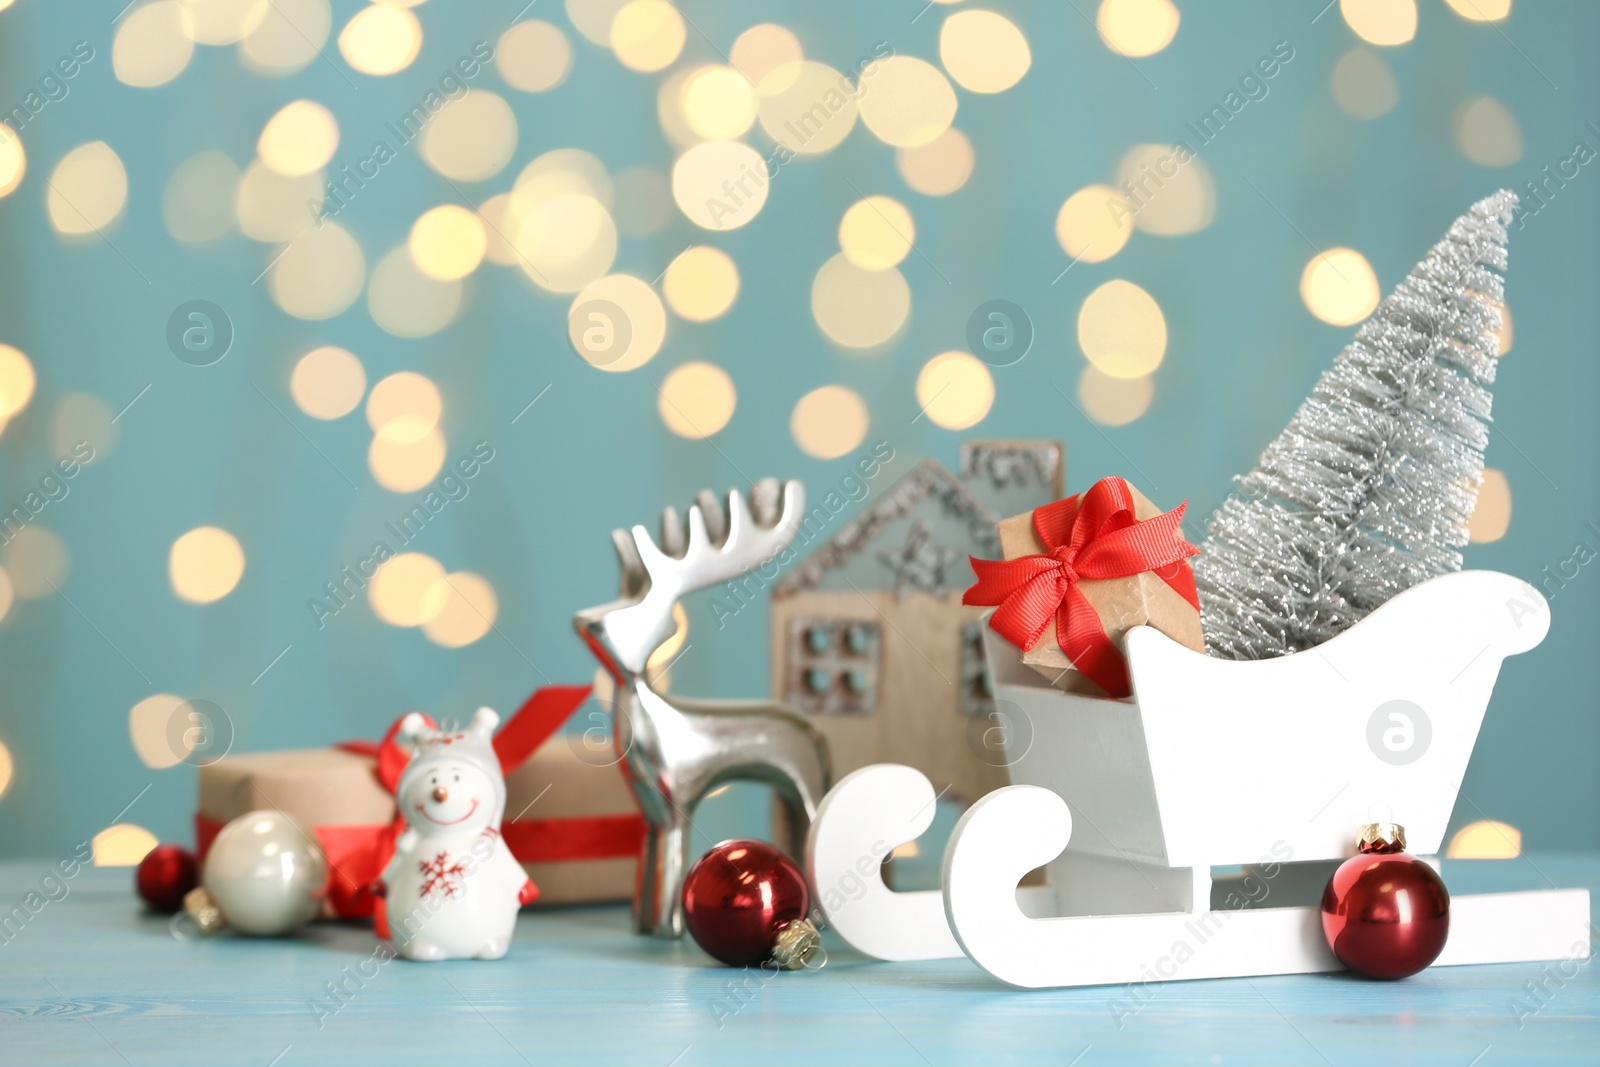 Photo of White sleigh with gift boxes and Christmas decor on light blue table against blurred lights